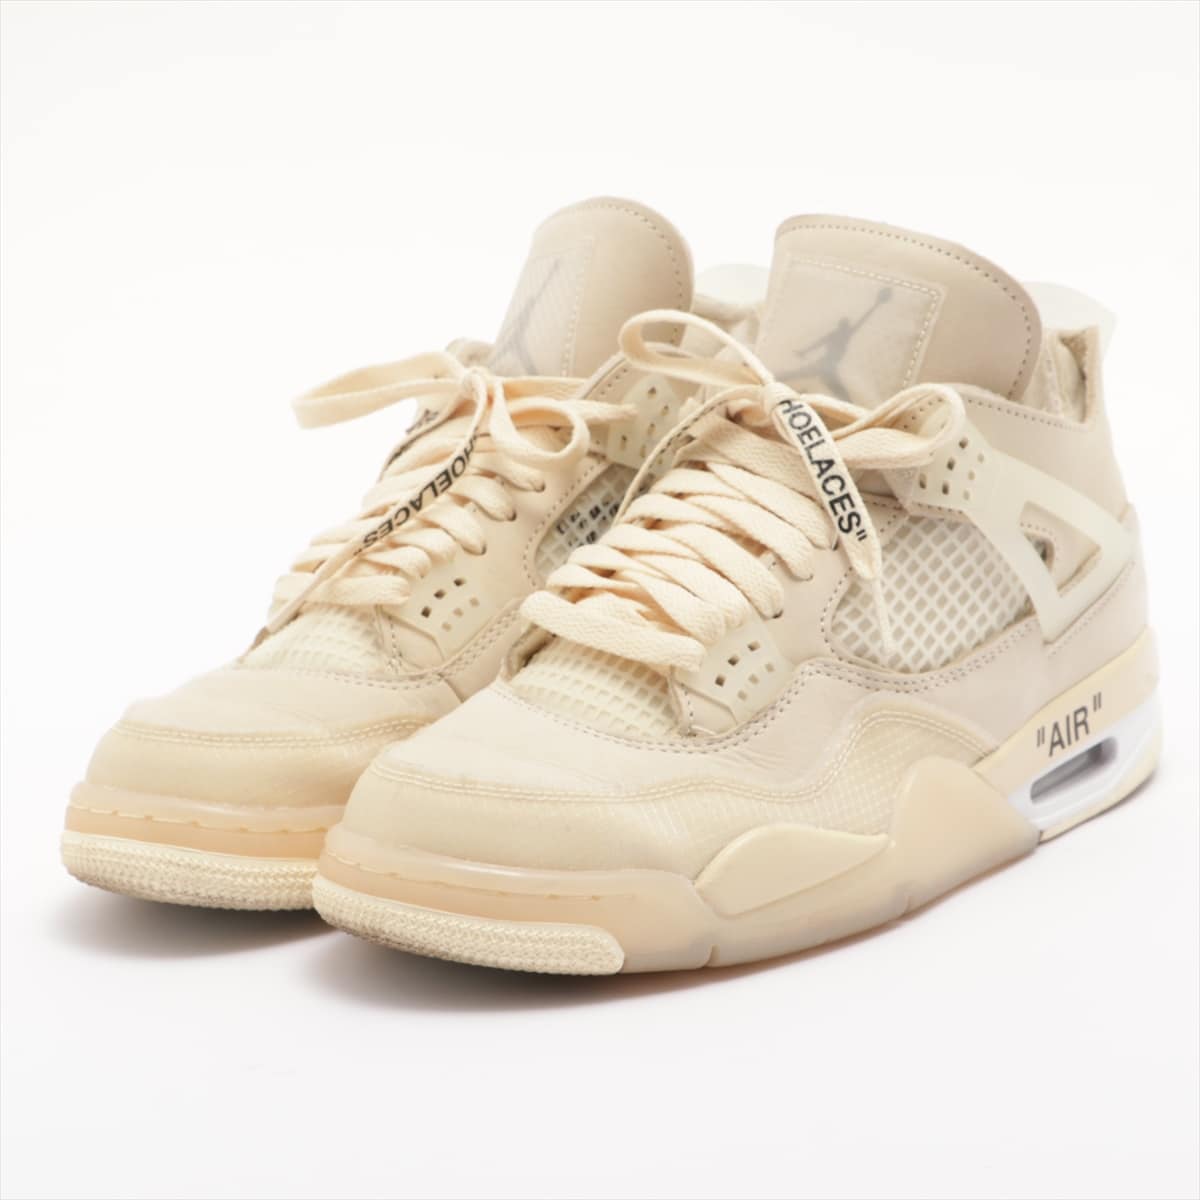 NIKE × OFF-WHITE AIR JORDAN 4 Leather Sneakers WMNS 26cm / MENS 25.5cm Unisex Ivory CV9388-100 Comes with a replacement string